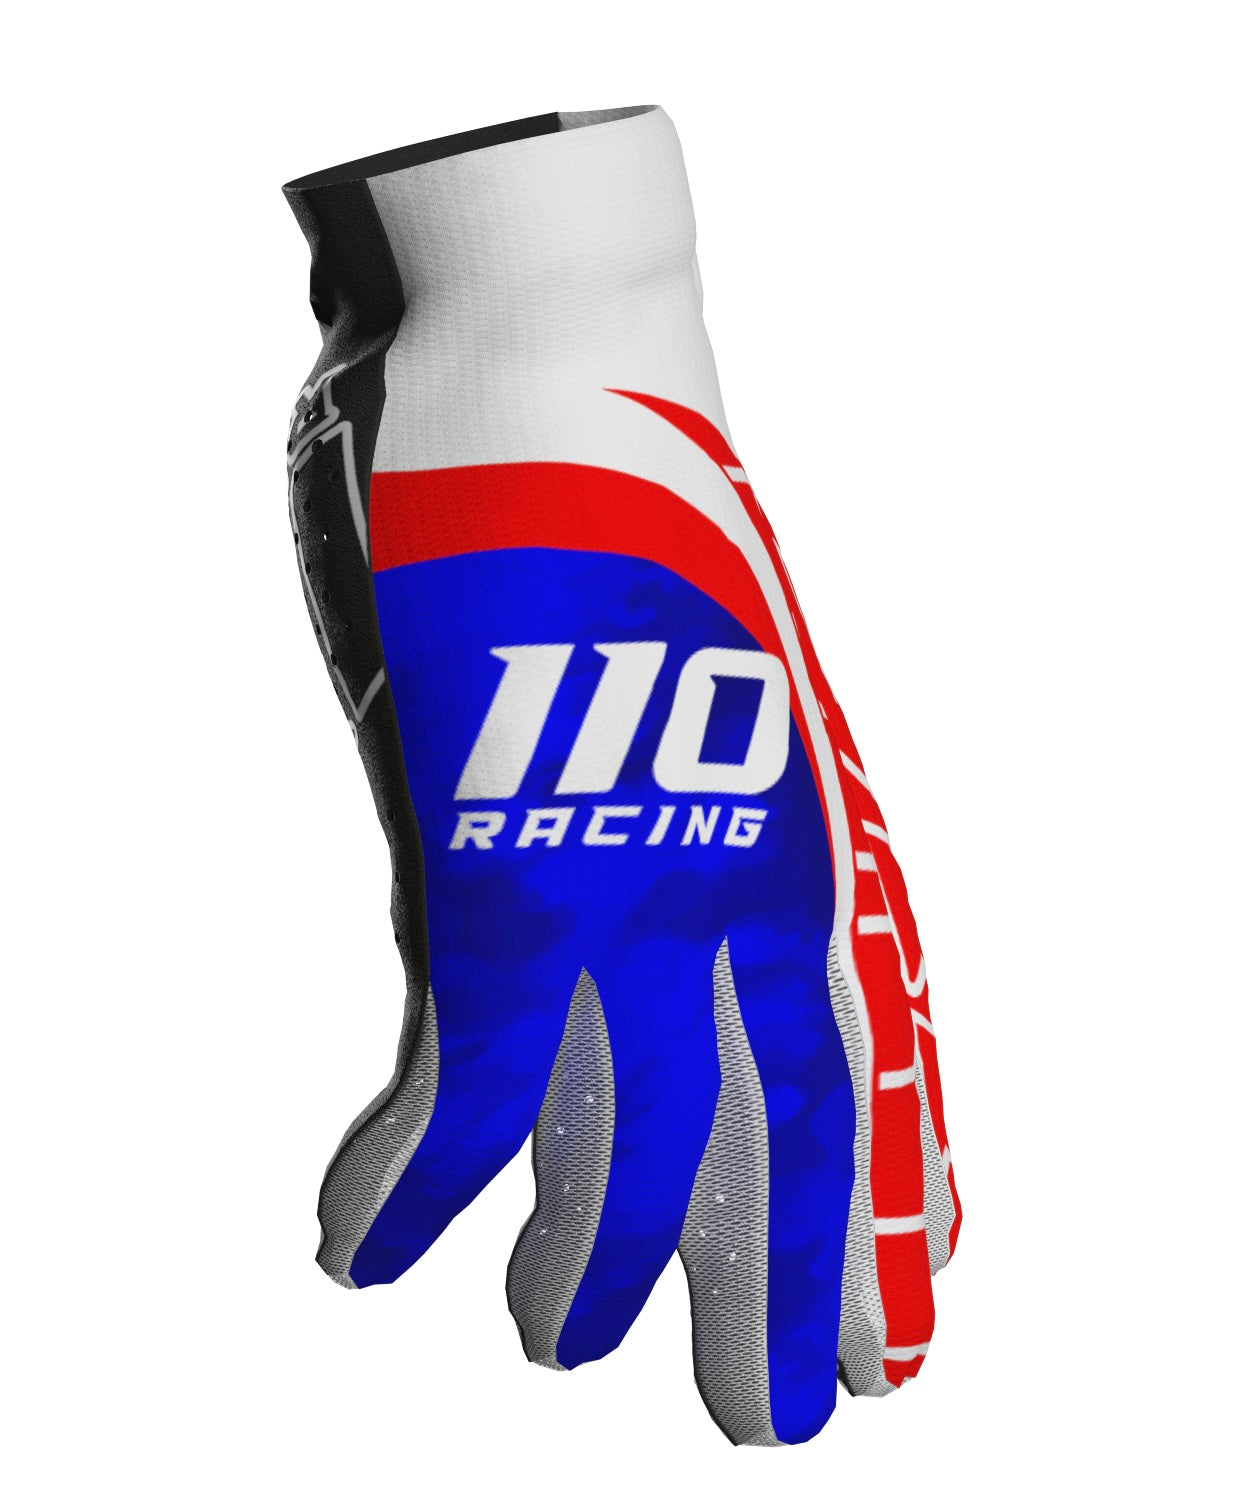 110 RACING // SE24 PRODIGY YOUTH GLOVE - RED/WHITE/BLUE